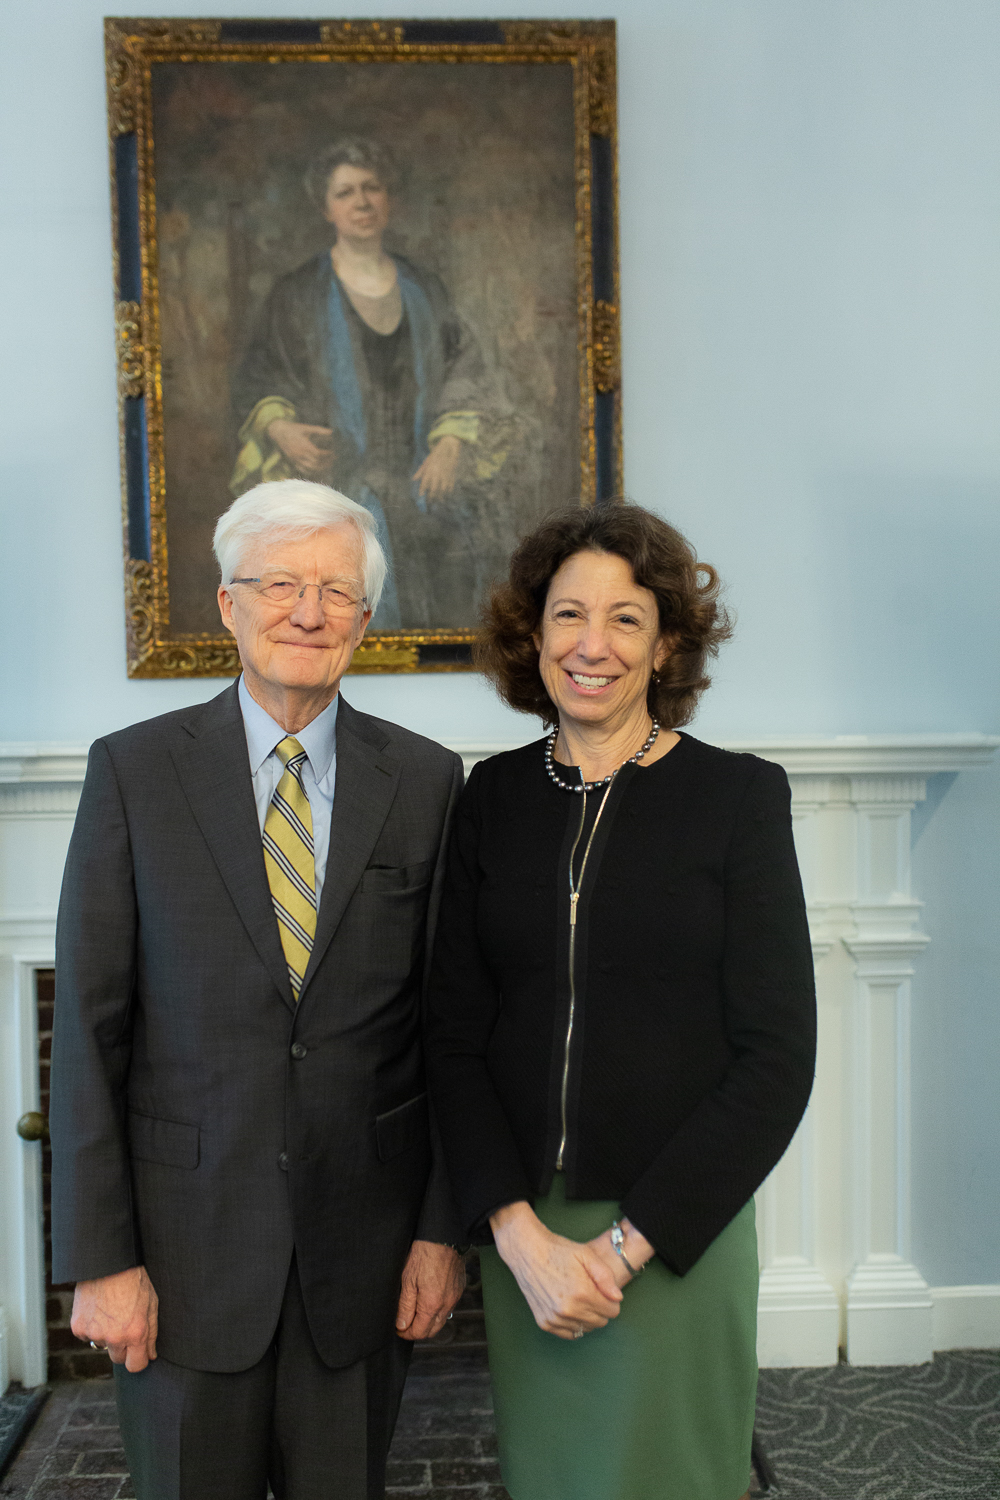 Left to right: Interim President Rich Hansen and President-elect Janet Steinmayer in front of a painting of Edith Lesley.